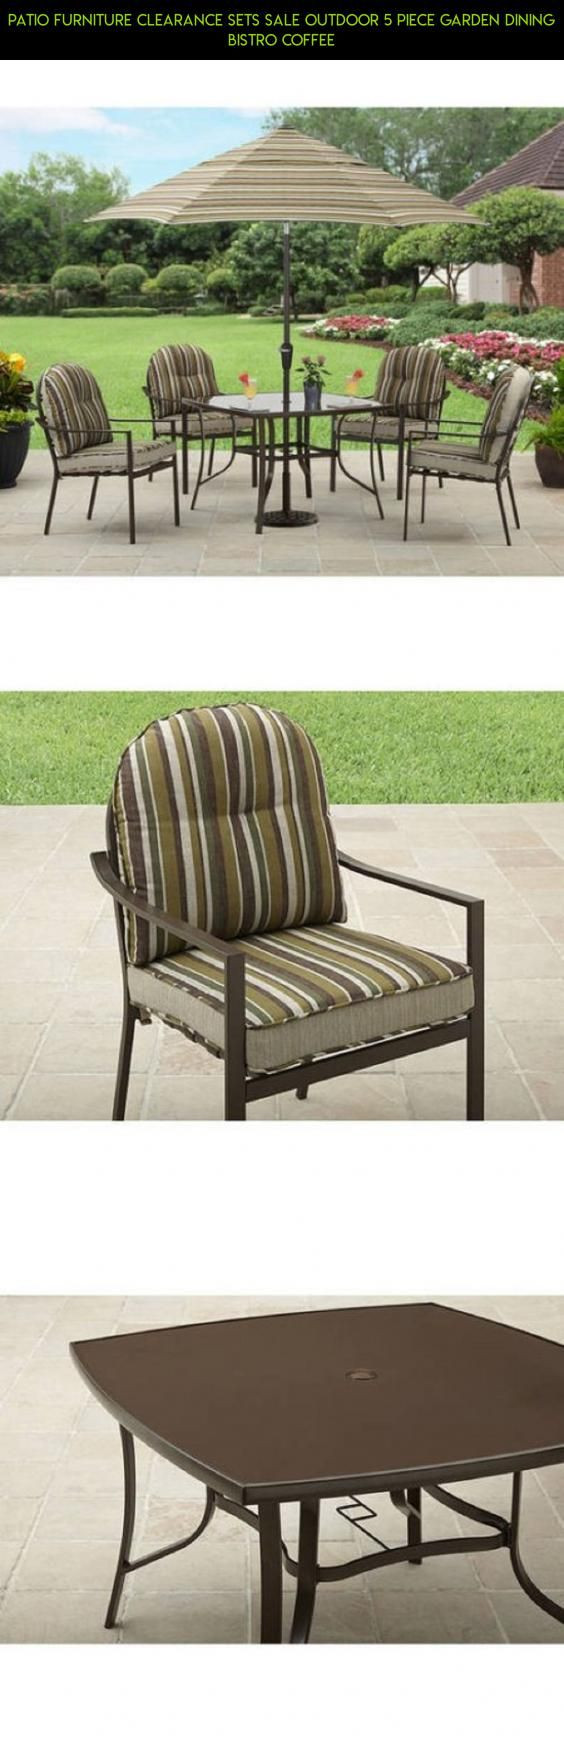 20 Of the Best Ideas for Home Depot Patio Furniture Sale - Best Collections Ever | Home Decor ...